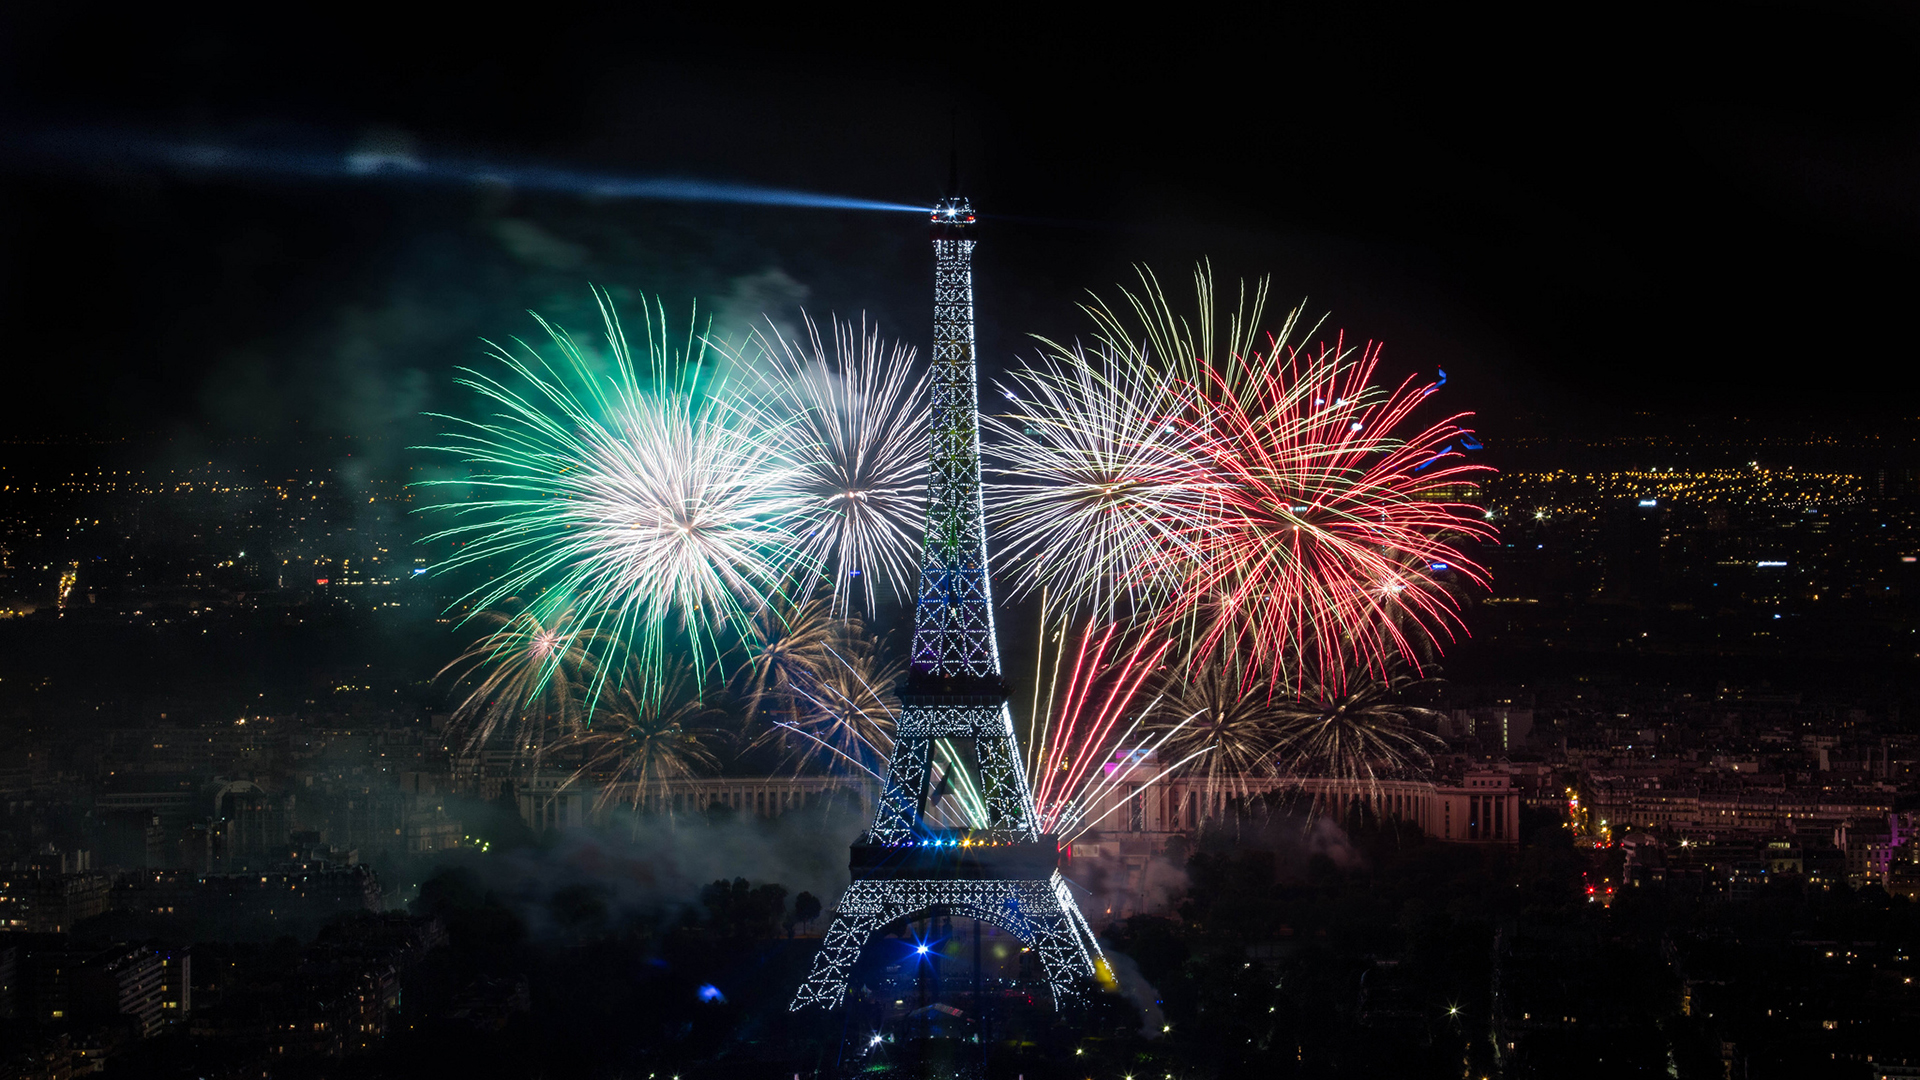 Eiffel Tower At Night With Fireworks - HD Wallpaper 